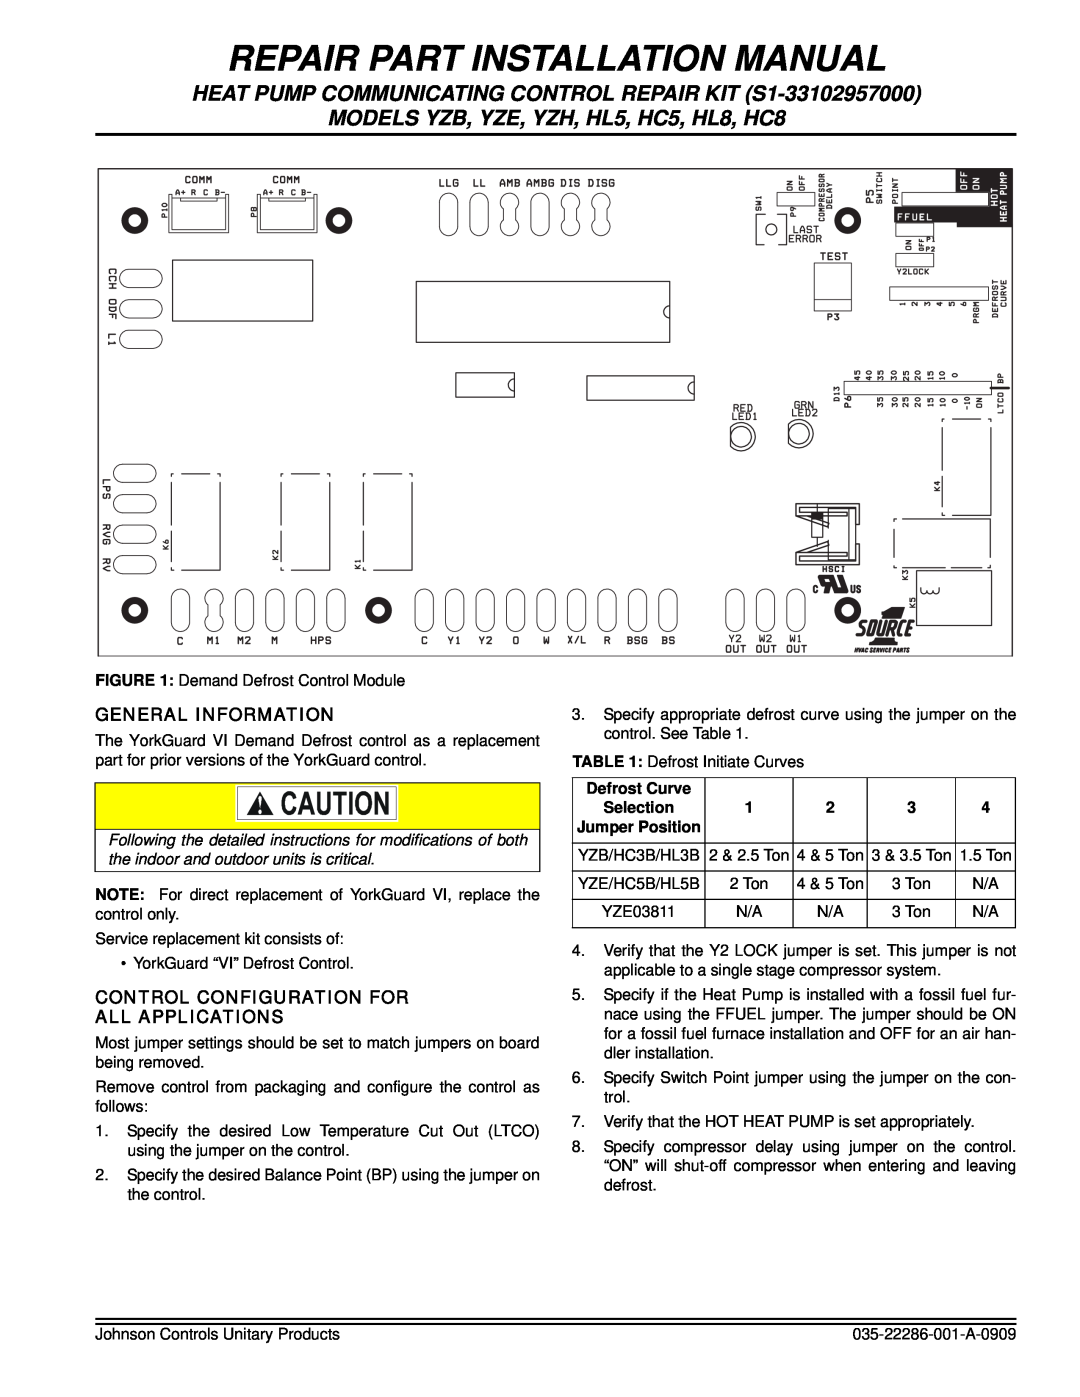 Johnson Controls yze installation manual General Information, Control Configuration For All Applications, Defrost Curve 